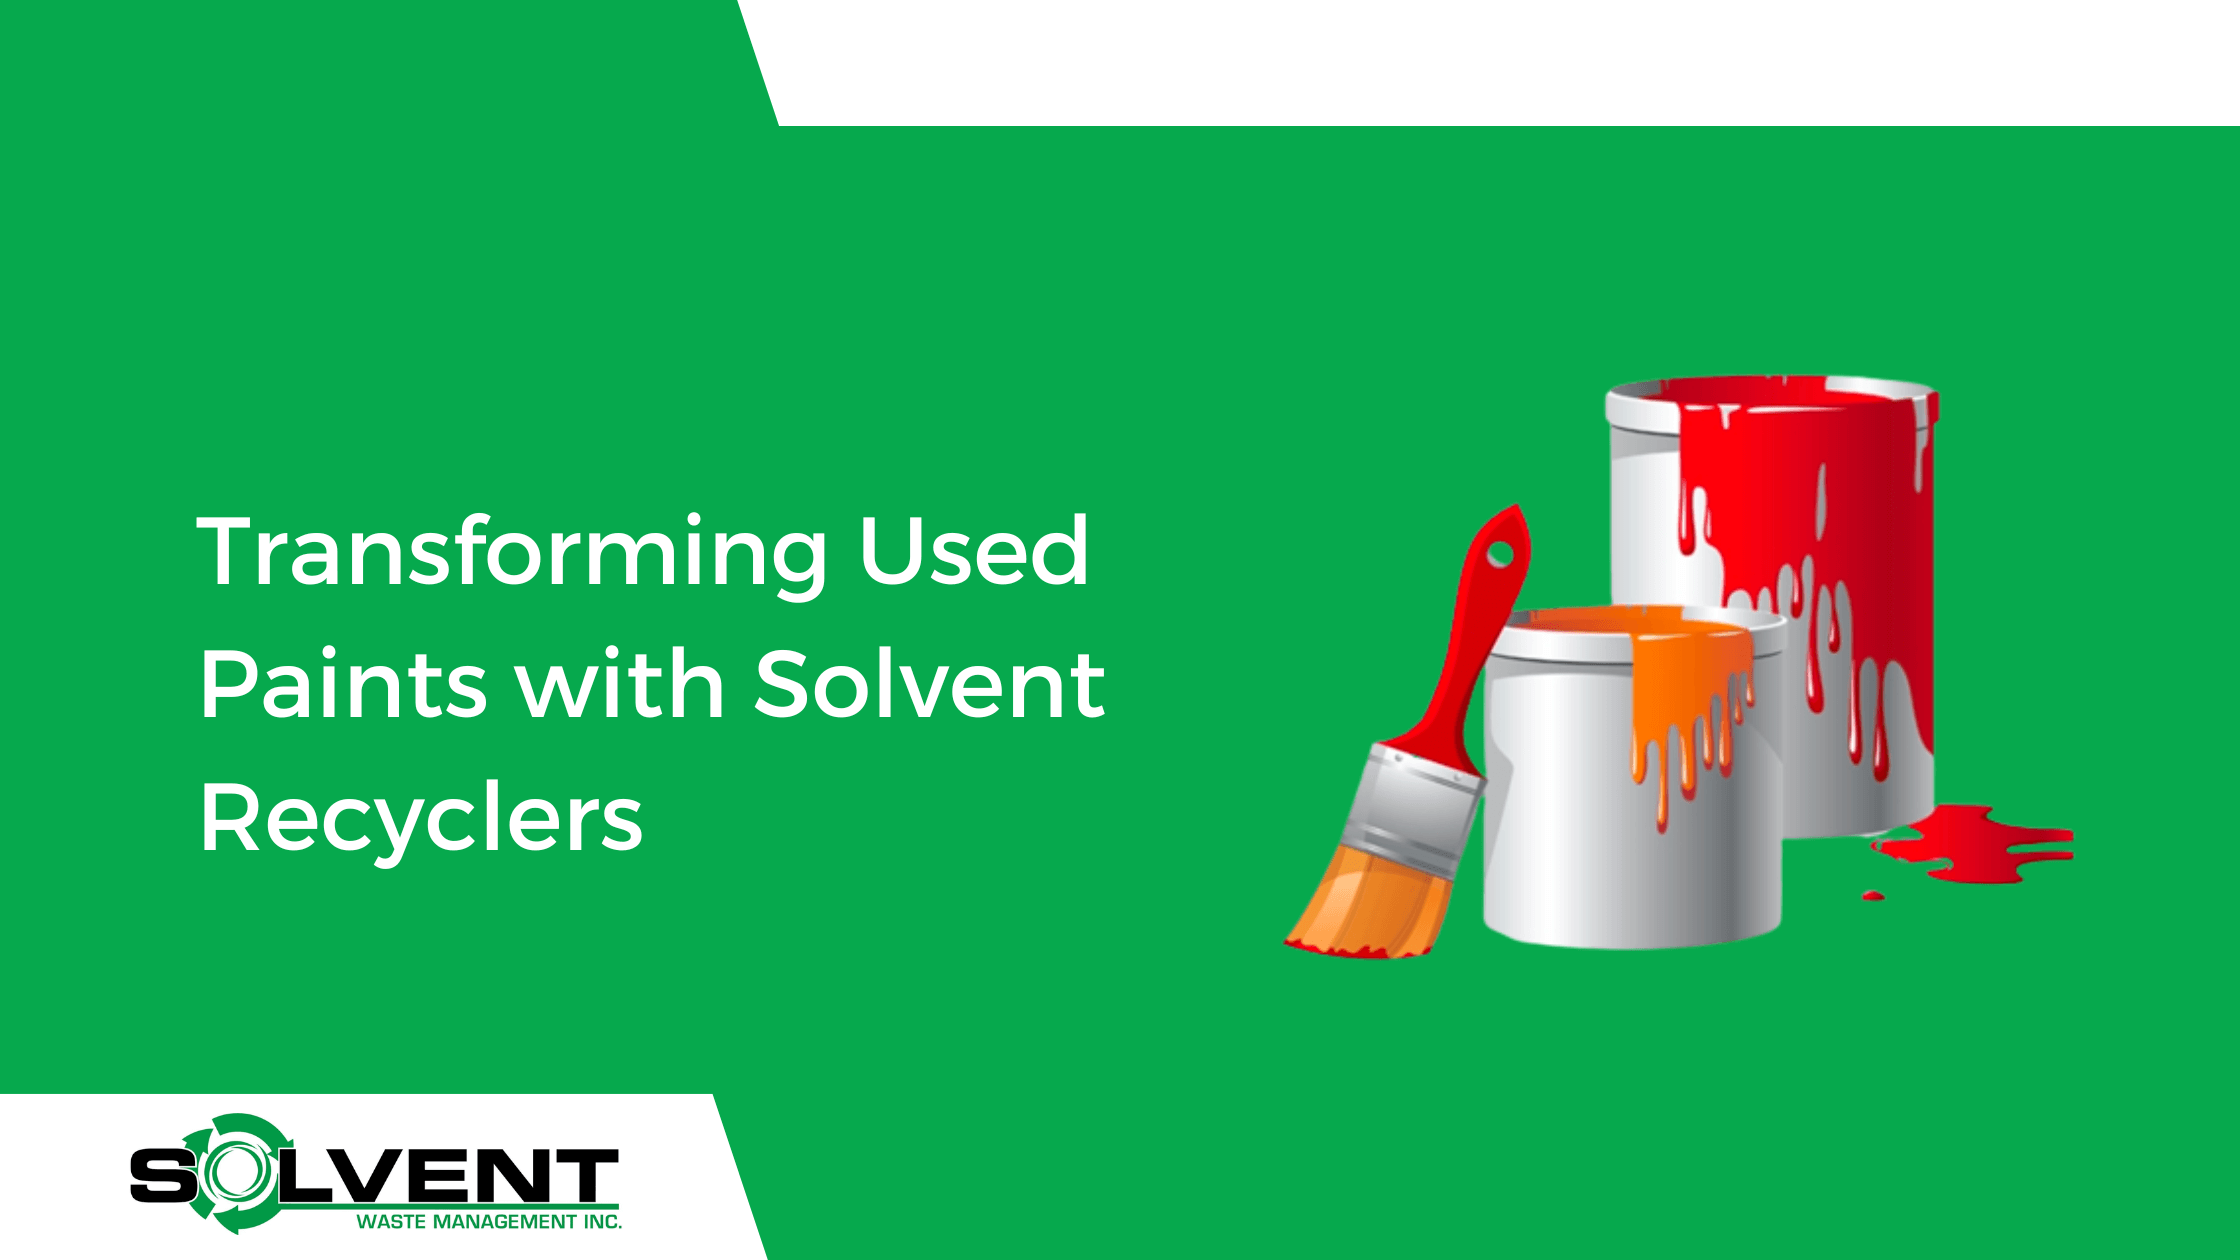 Transforming Used Paints with Solvent Recyclers | Solvent Waste Management